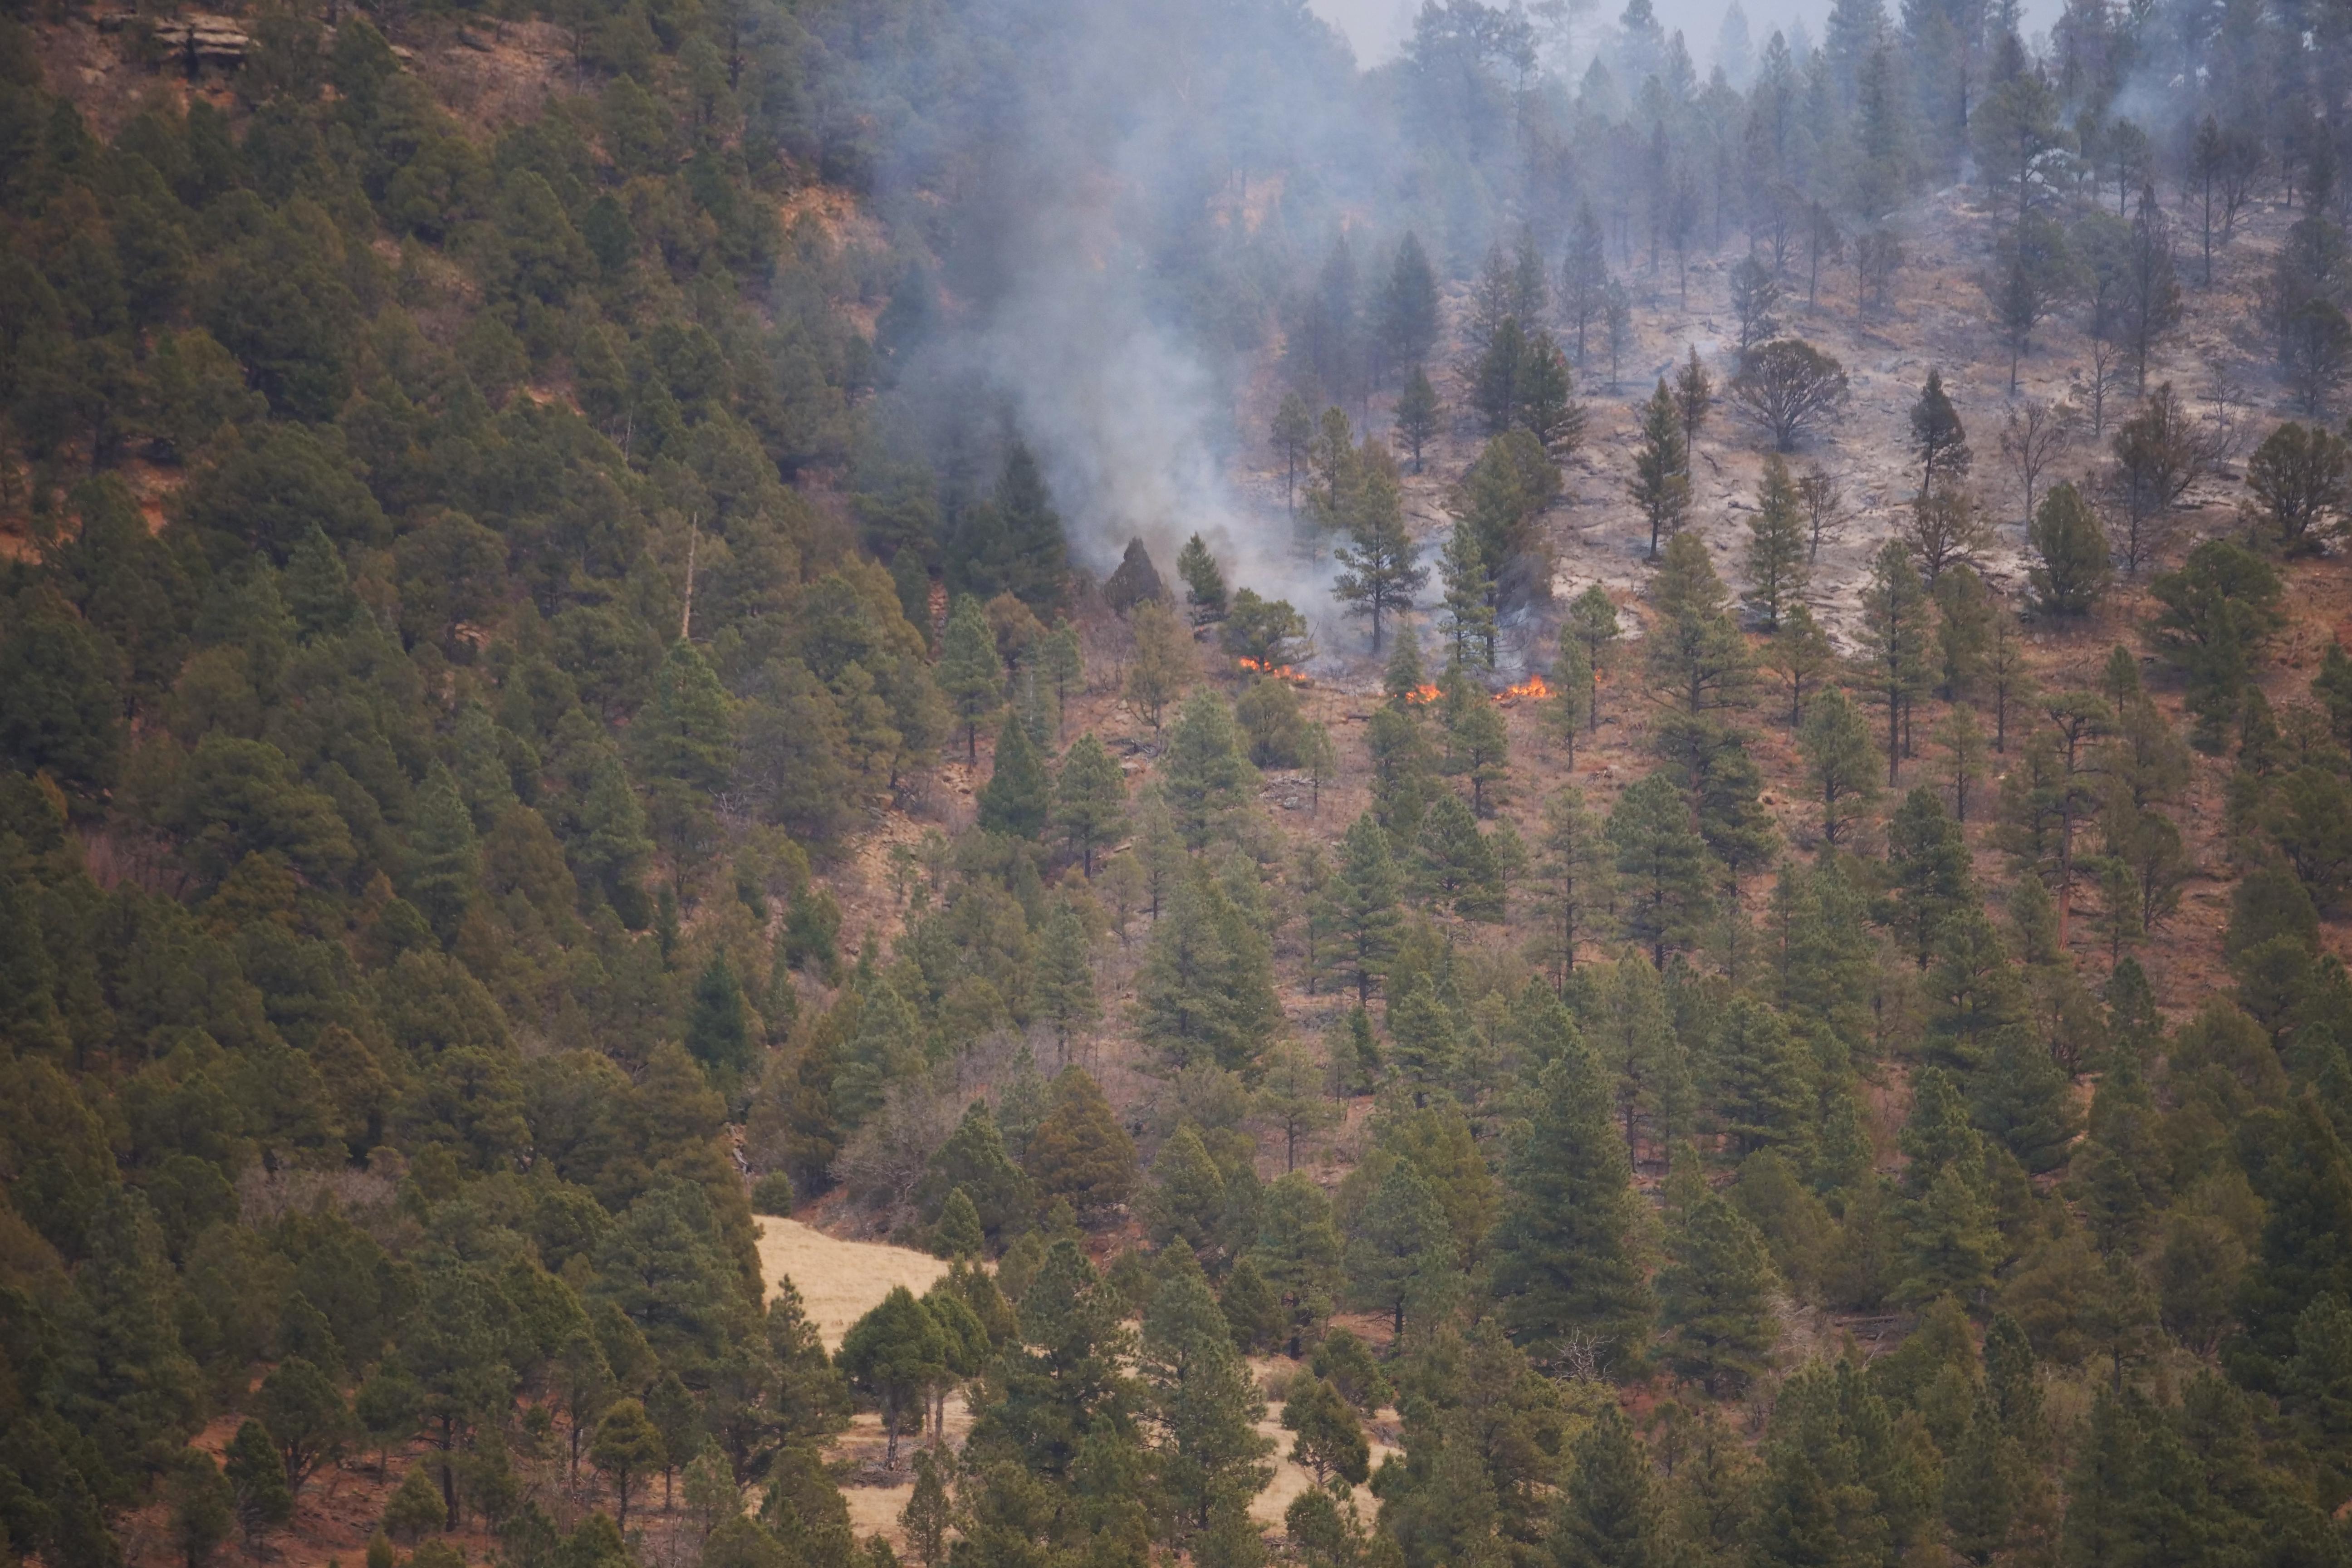 Fire backs down a ridge on the north side of the Mora River Valley.